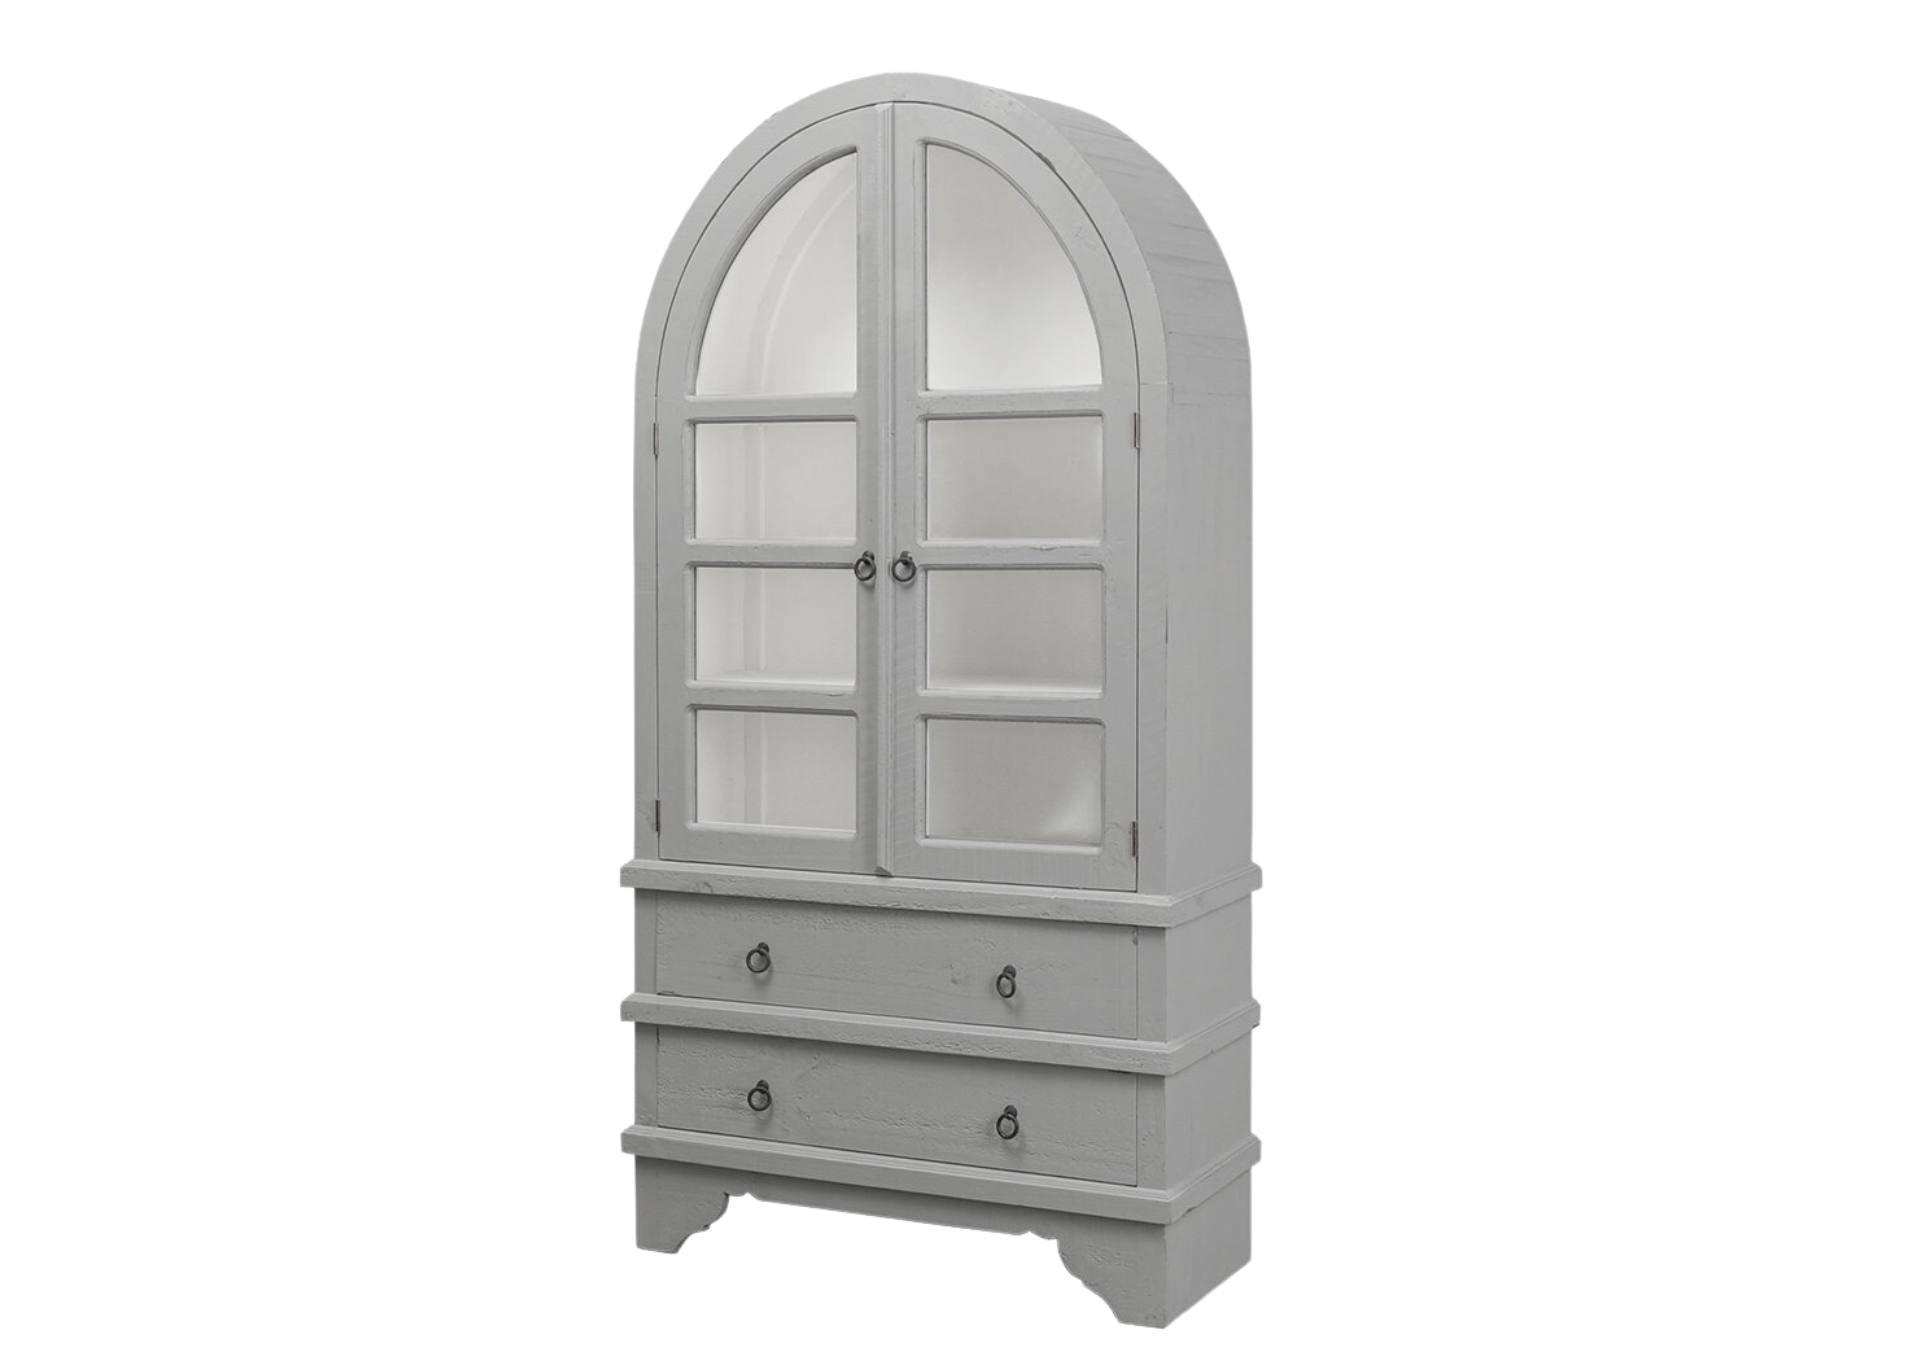 VITO GREY/WHITE DISPLAY CABINET,ARDENT HOME